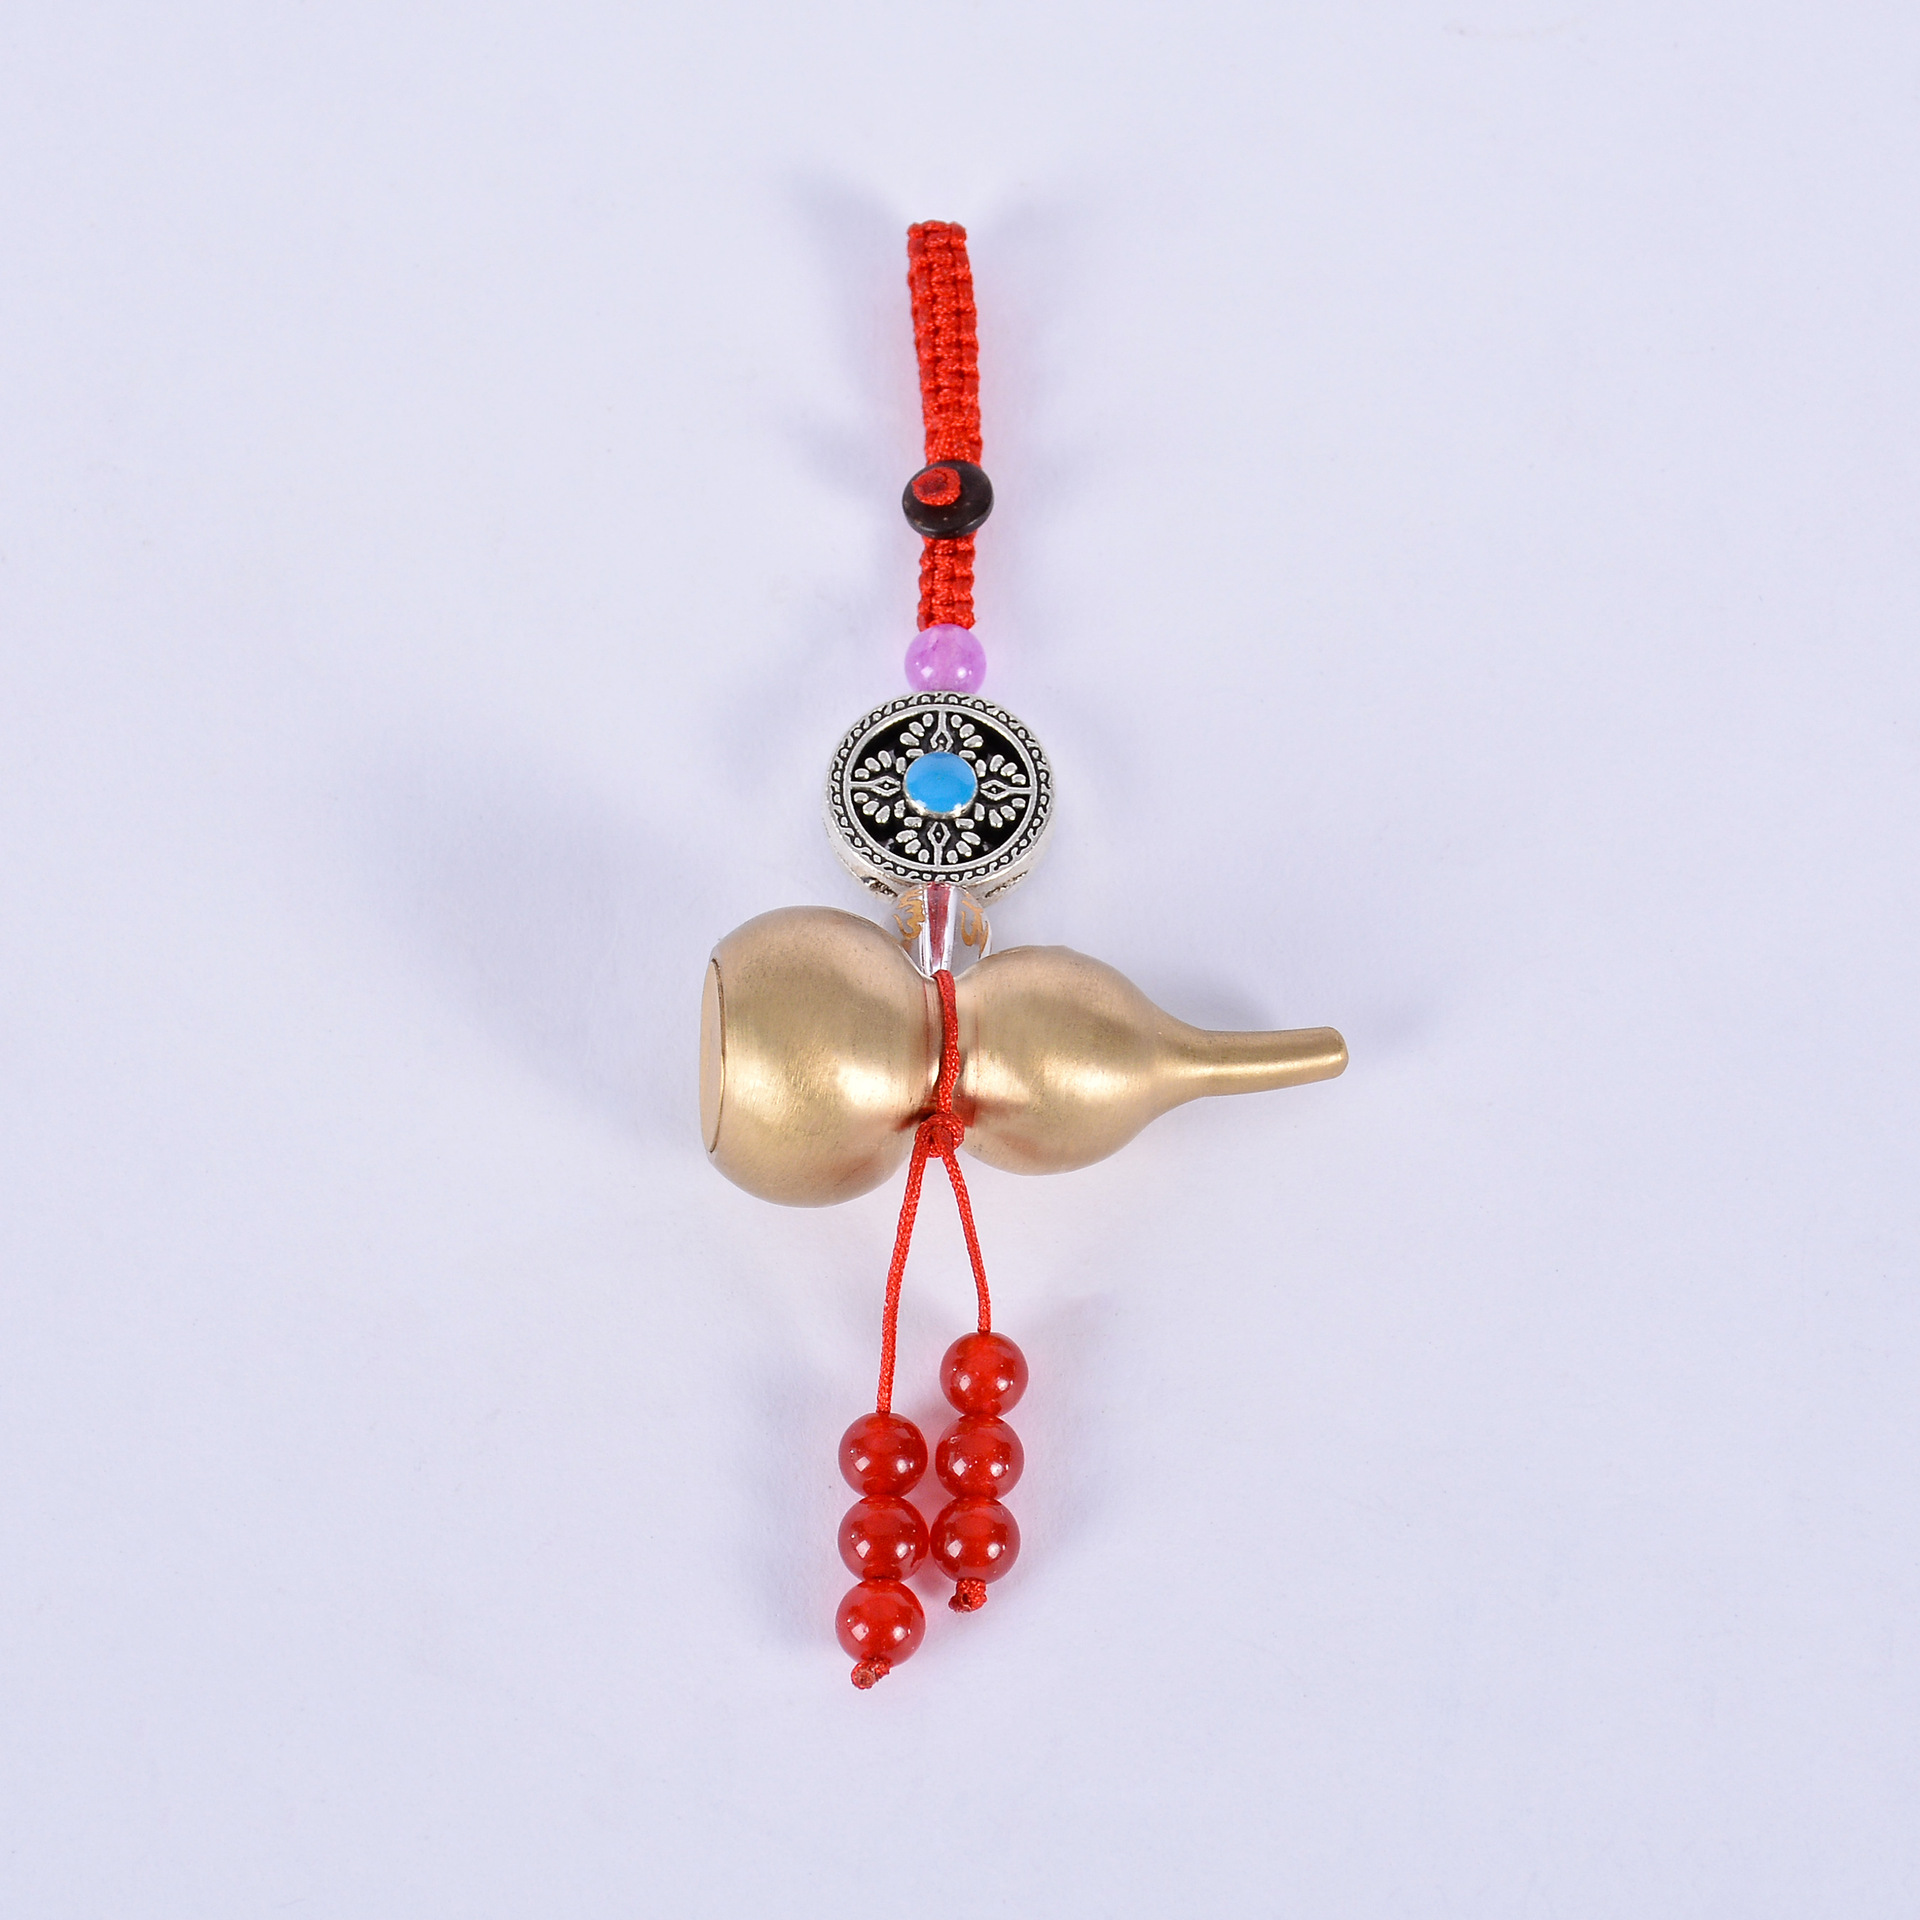 Chinese Knot Can Open Copper Gourd Hanging Gourd Qing Dynasty Five Emperors' Coins Automobile Hanging Ornament Gourd Listing